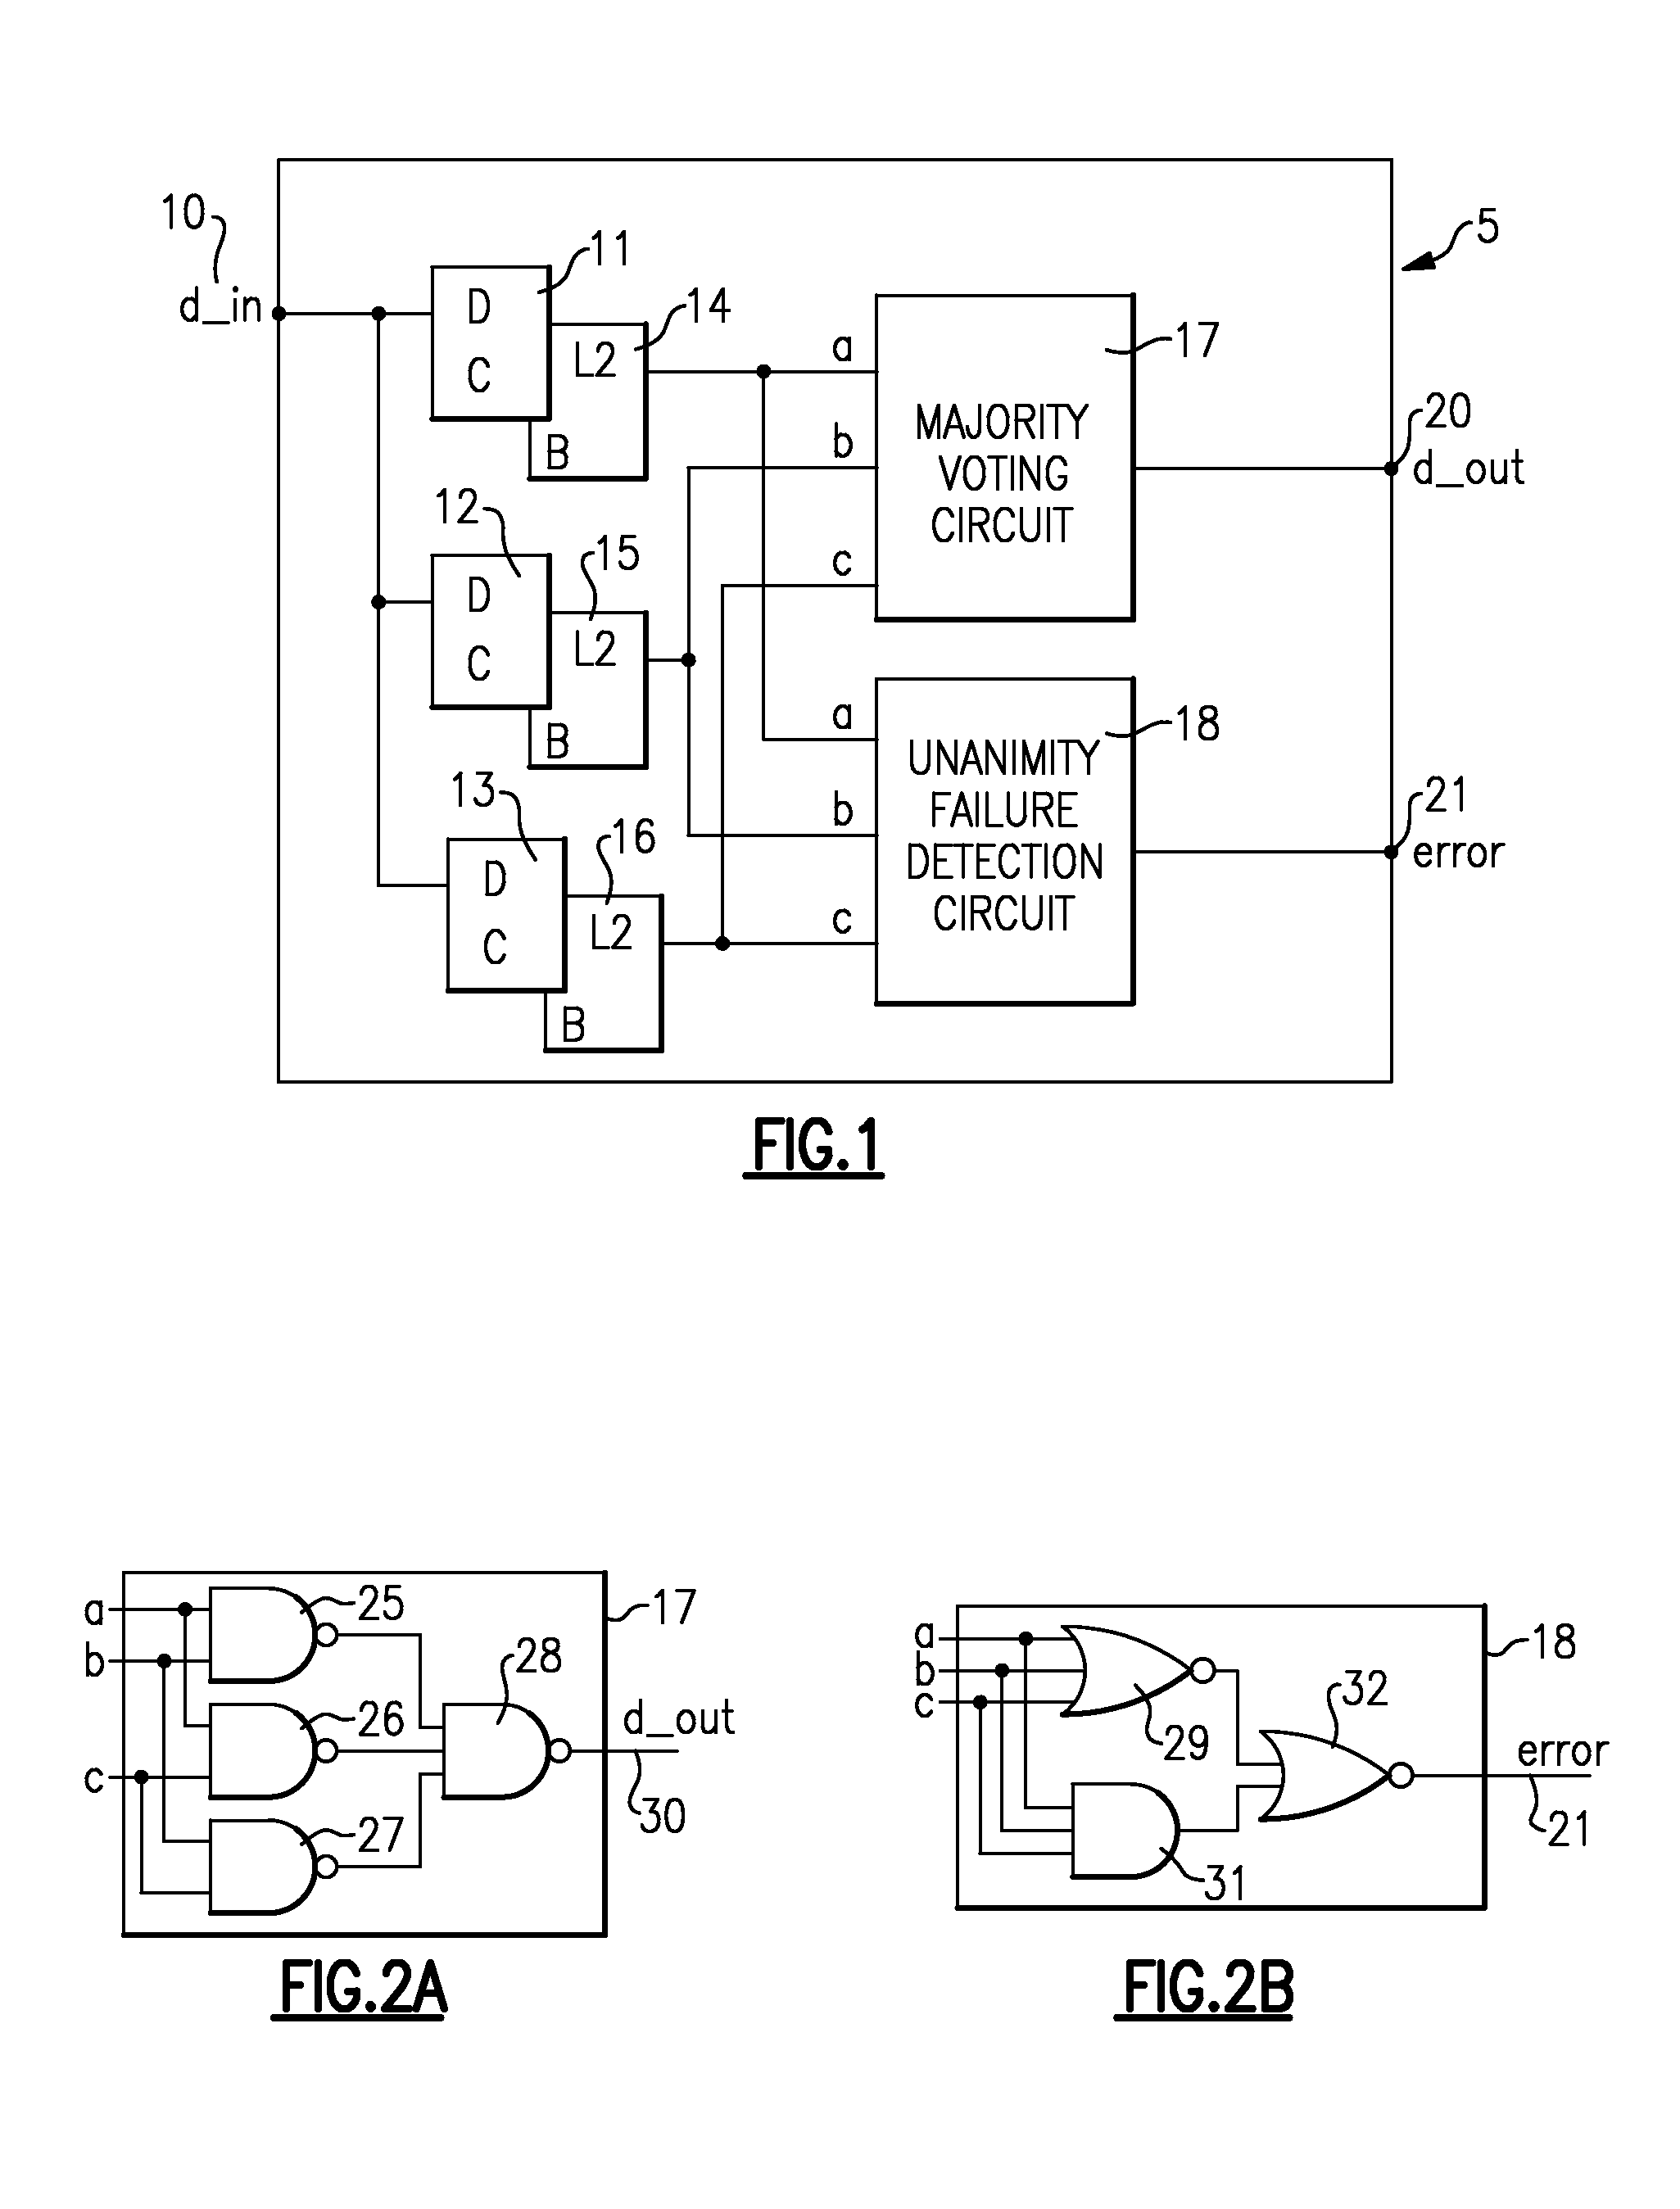 Fault Tolerant Self-Correcting Non-Glitching Low Power Circuit for Static and Dynamic Data Storage